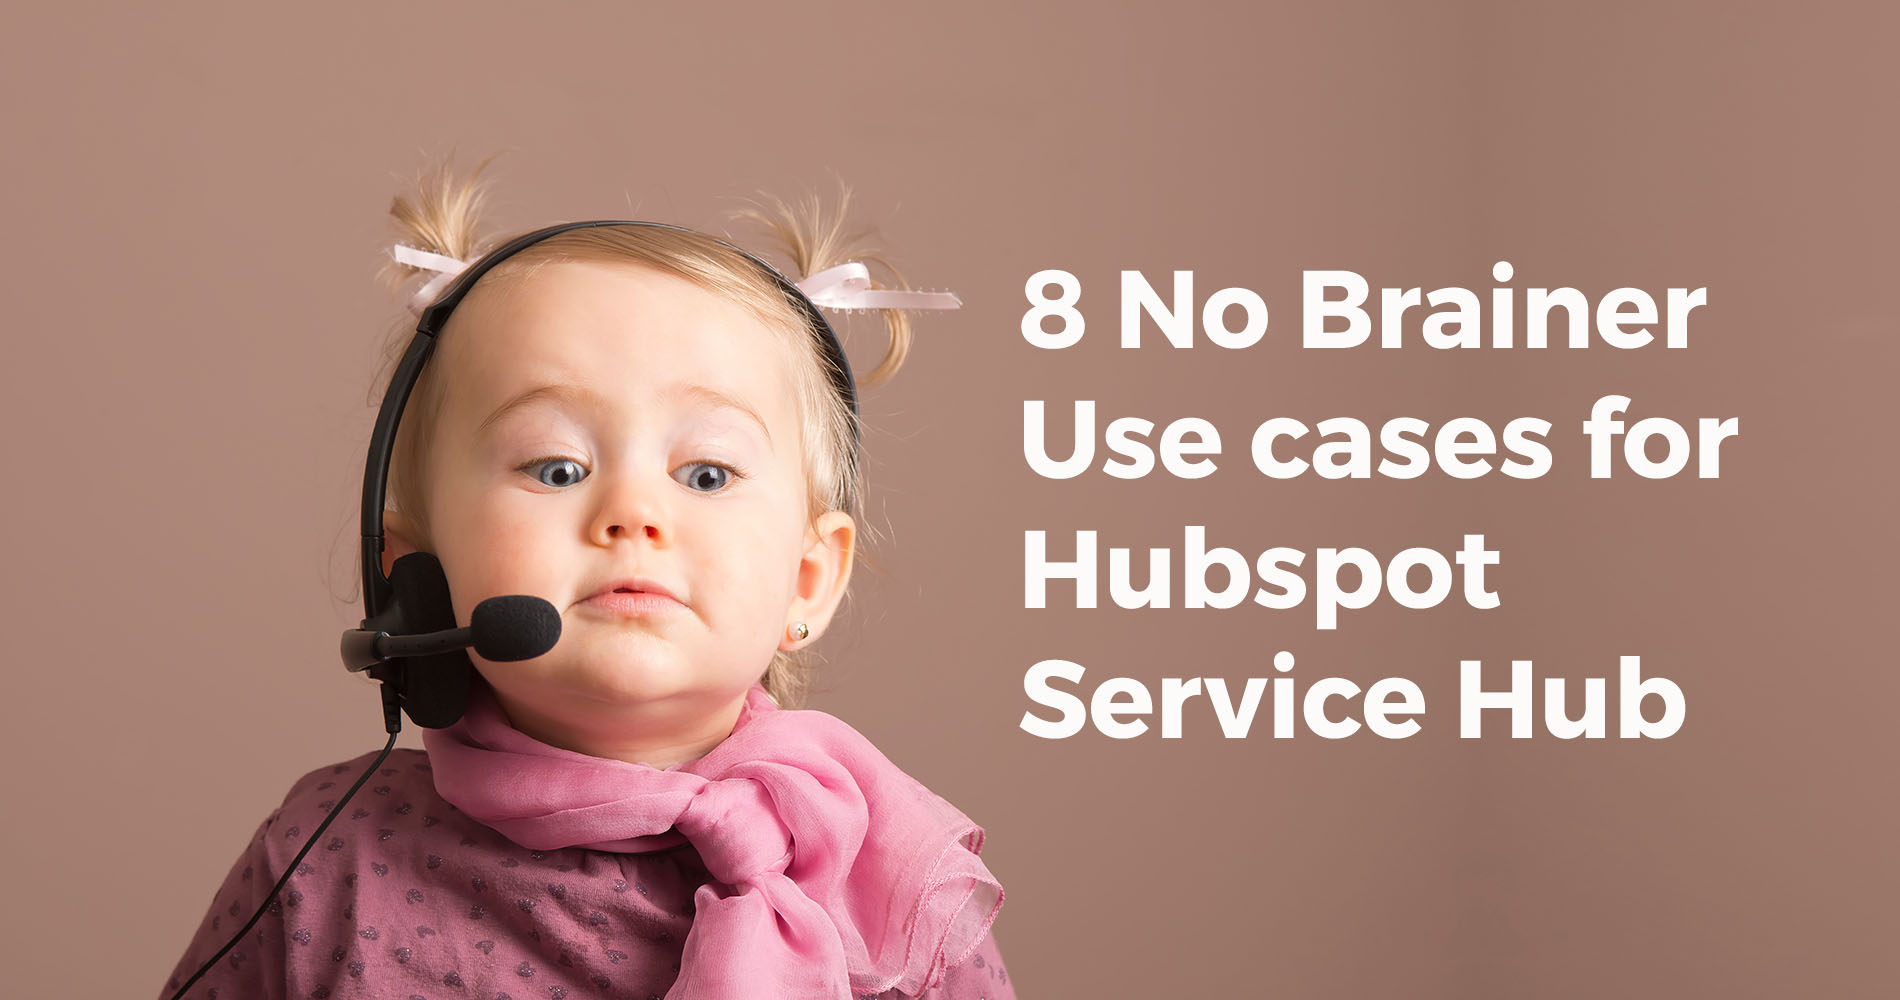 8 No Brainer Use cases for Hubspot Service Hub